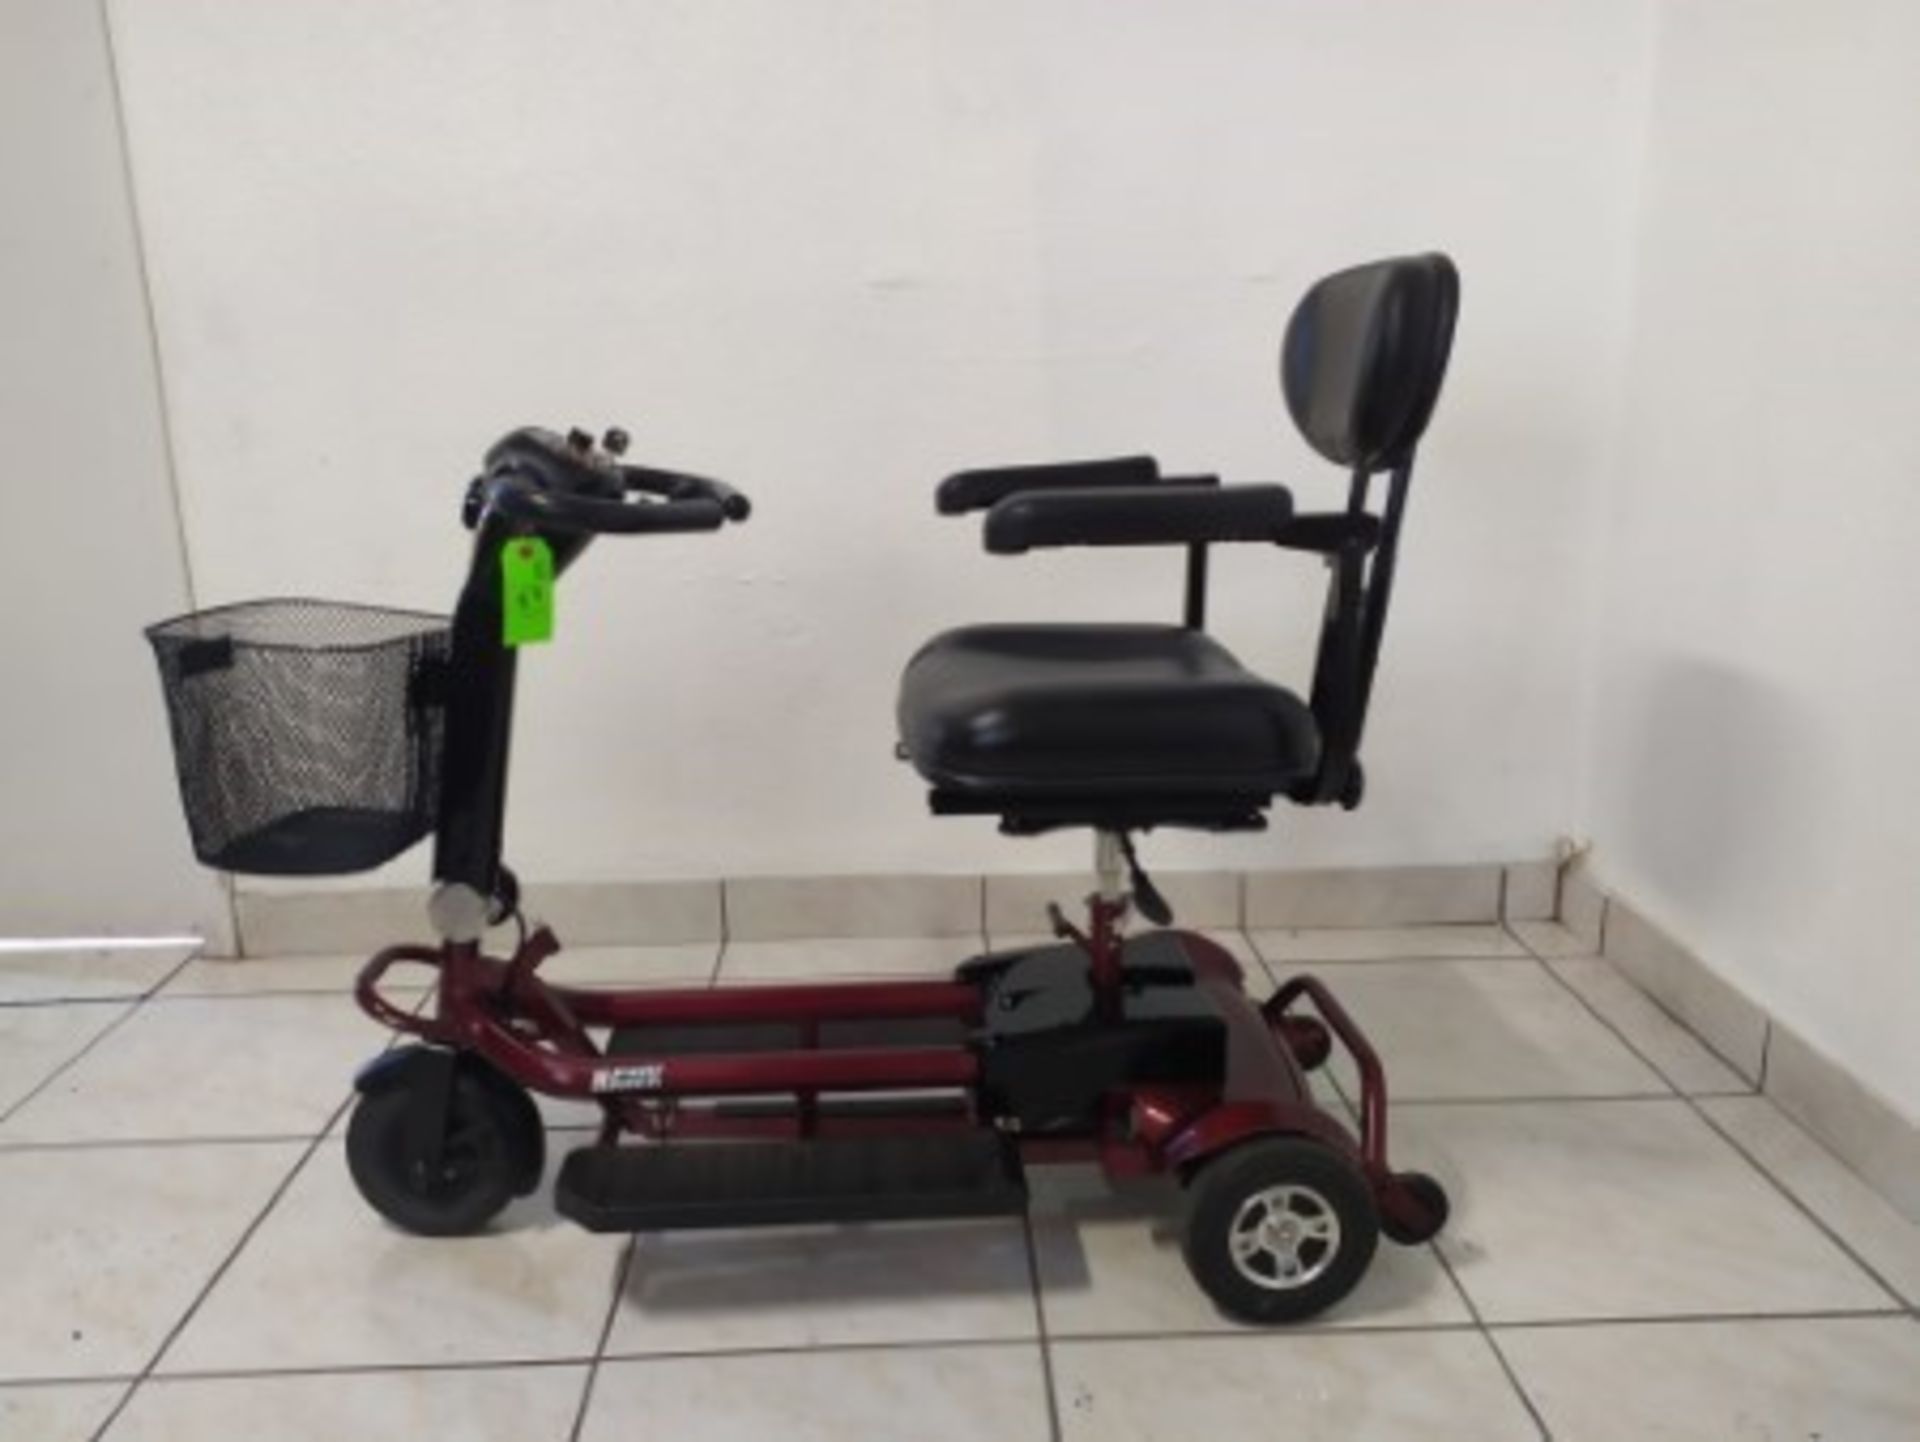 2009 DRIVE HAWK 3-WHEEL SCOOTER WITH BASKET - RED - 250LB CAPACITY - SERIAL No. 2A06090137PQ (NO CHA - Image 2 of 6